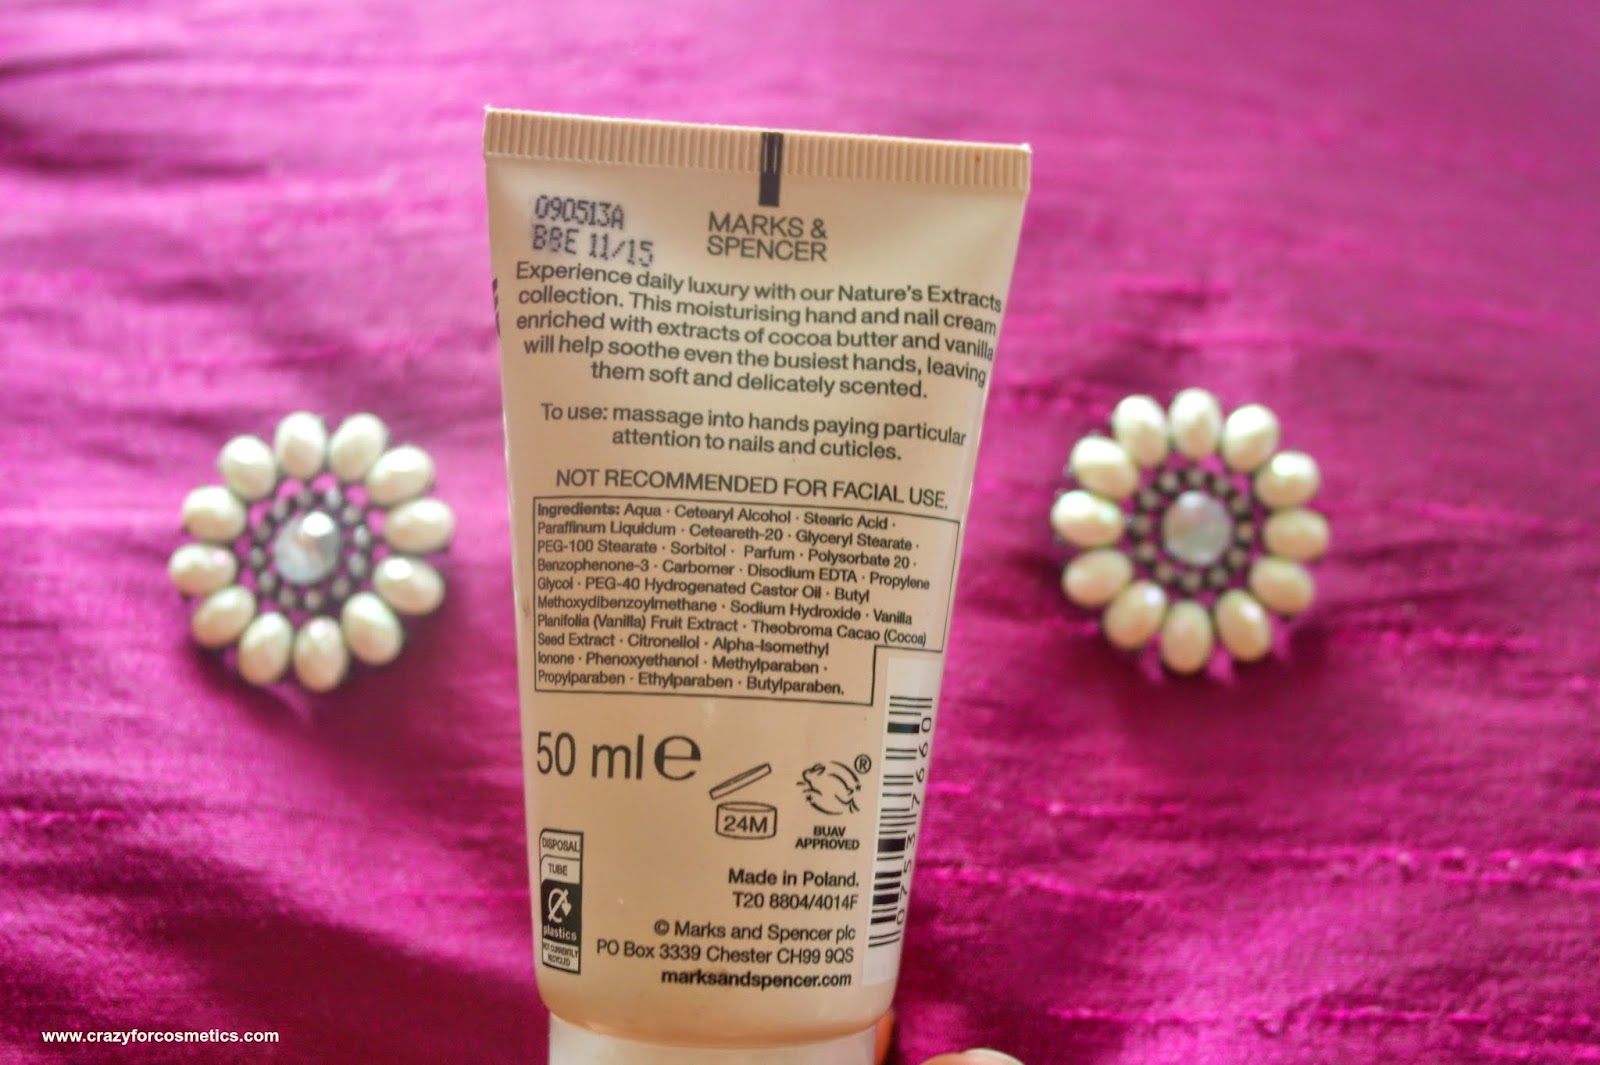 Marks & Spencers Cocoa Butter Moisturizing Hand and Nail Cream India